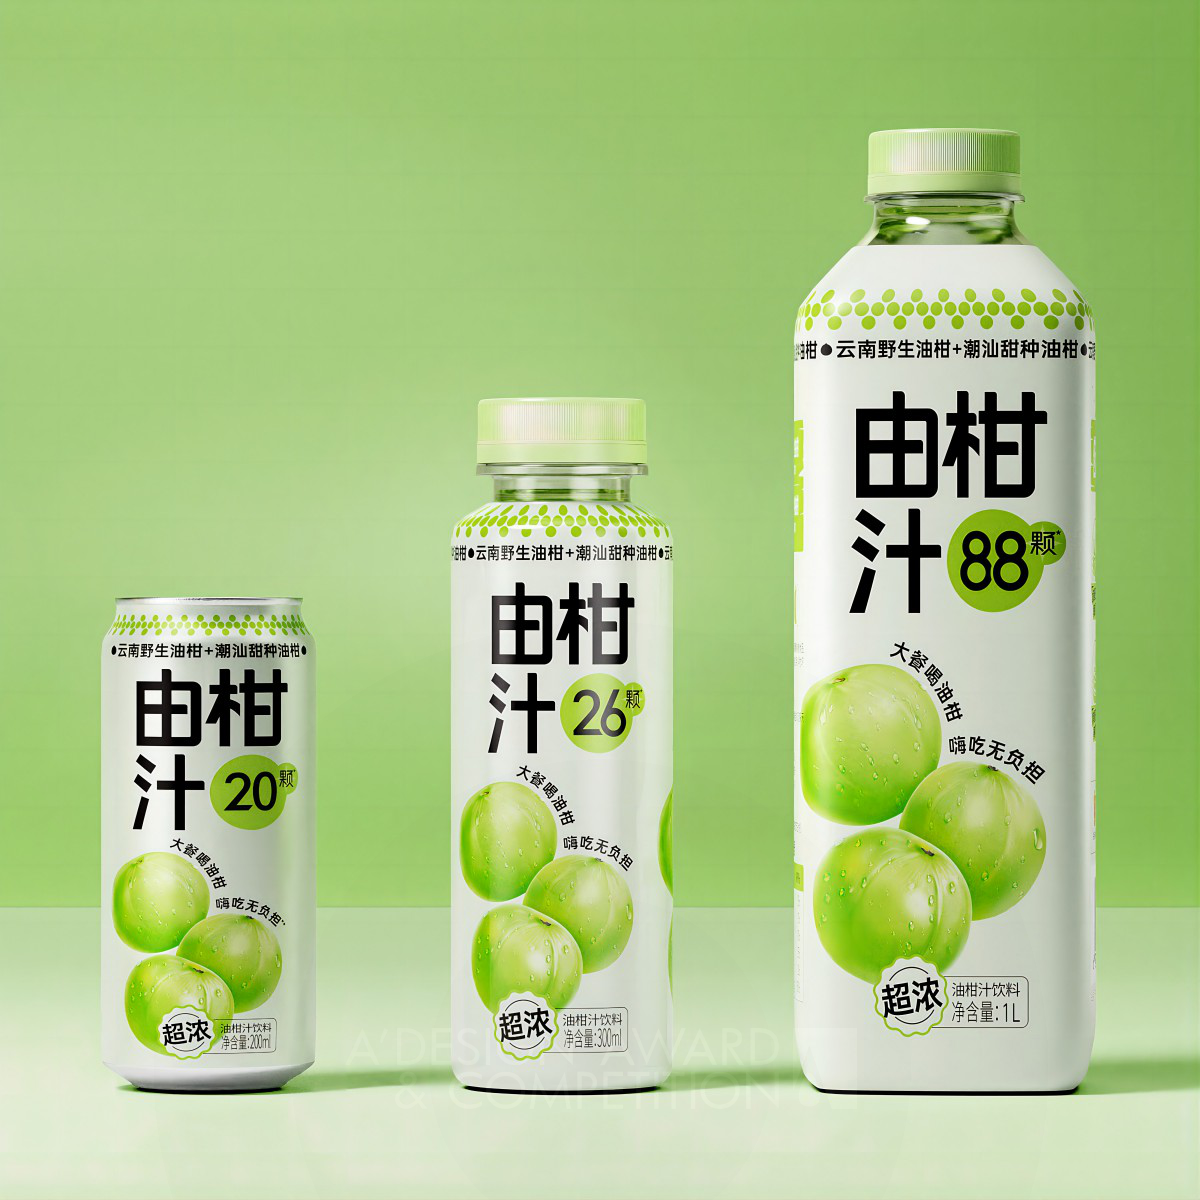 Jianchao Chen wins Iron at the prestigious A' Packaging Design Award with Eastroc Amla Juice Beverage Packaging.